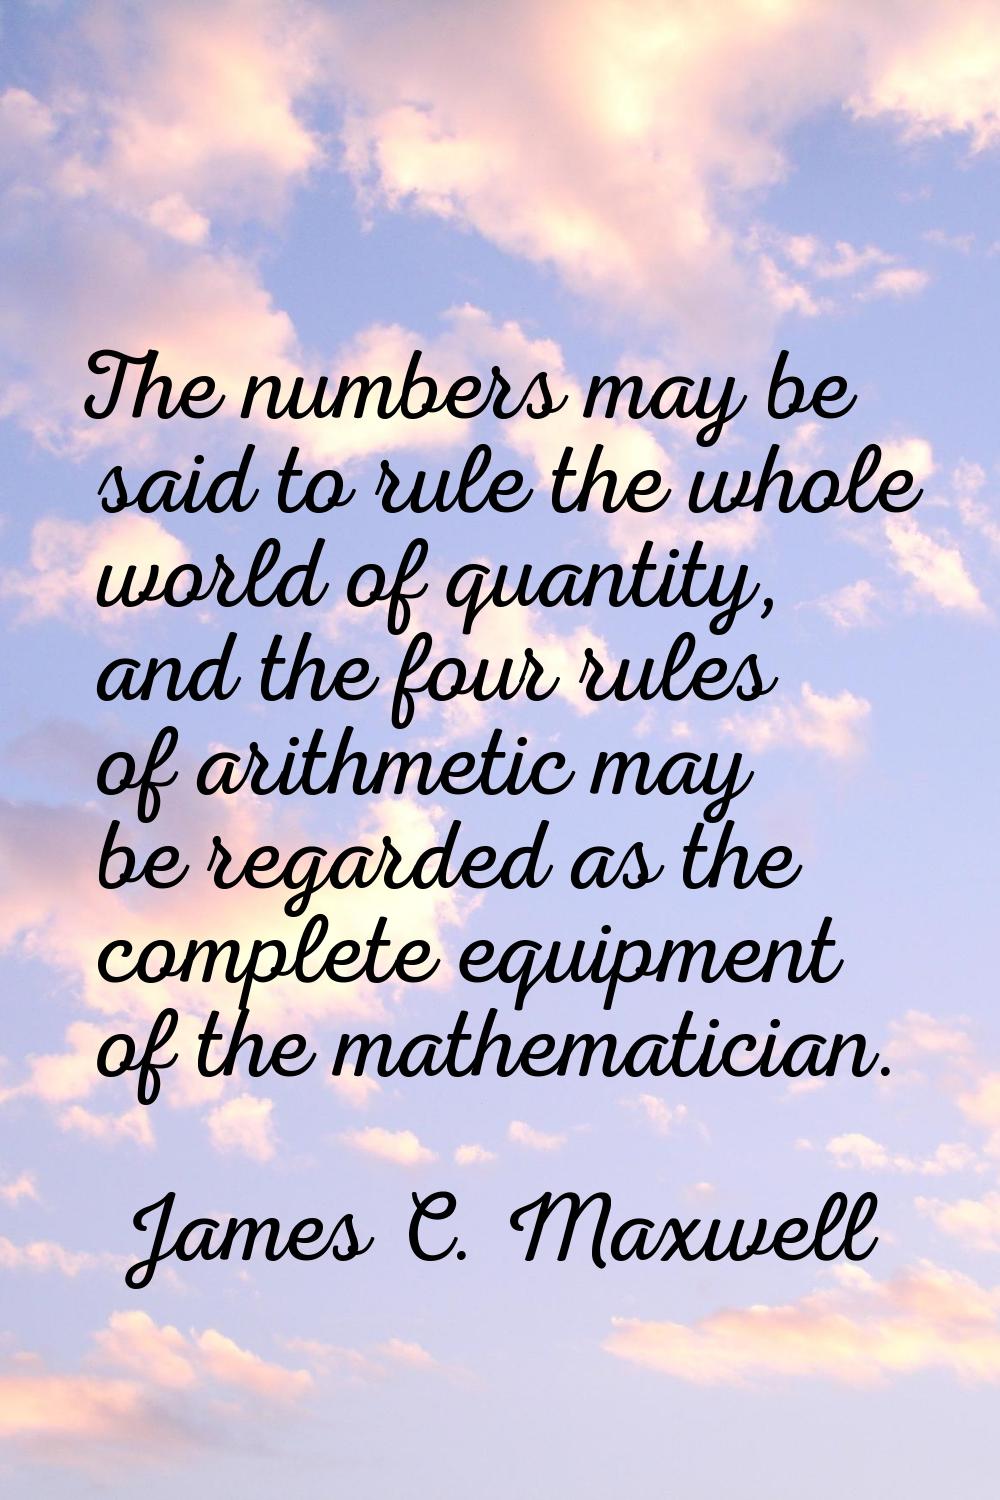 The numbers may be said to rule the whole world of quantity, and the four rules of arithmetic may b